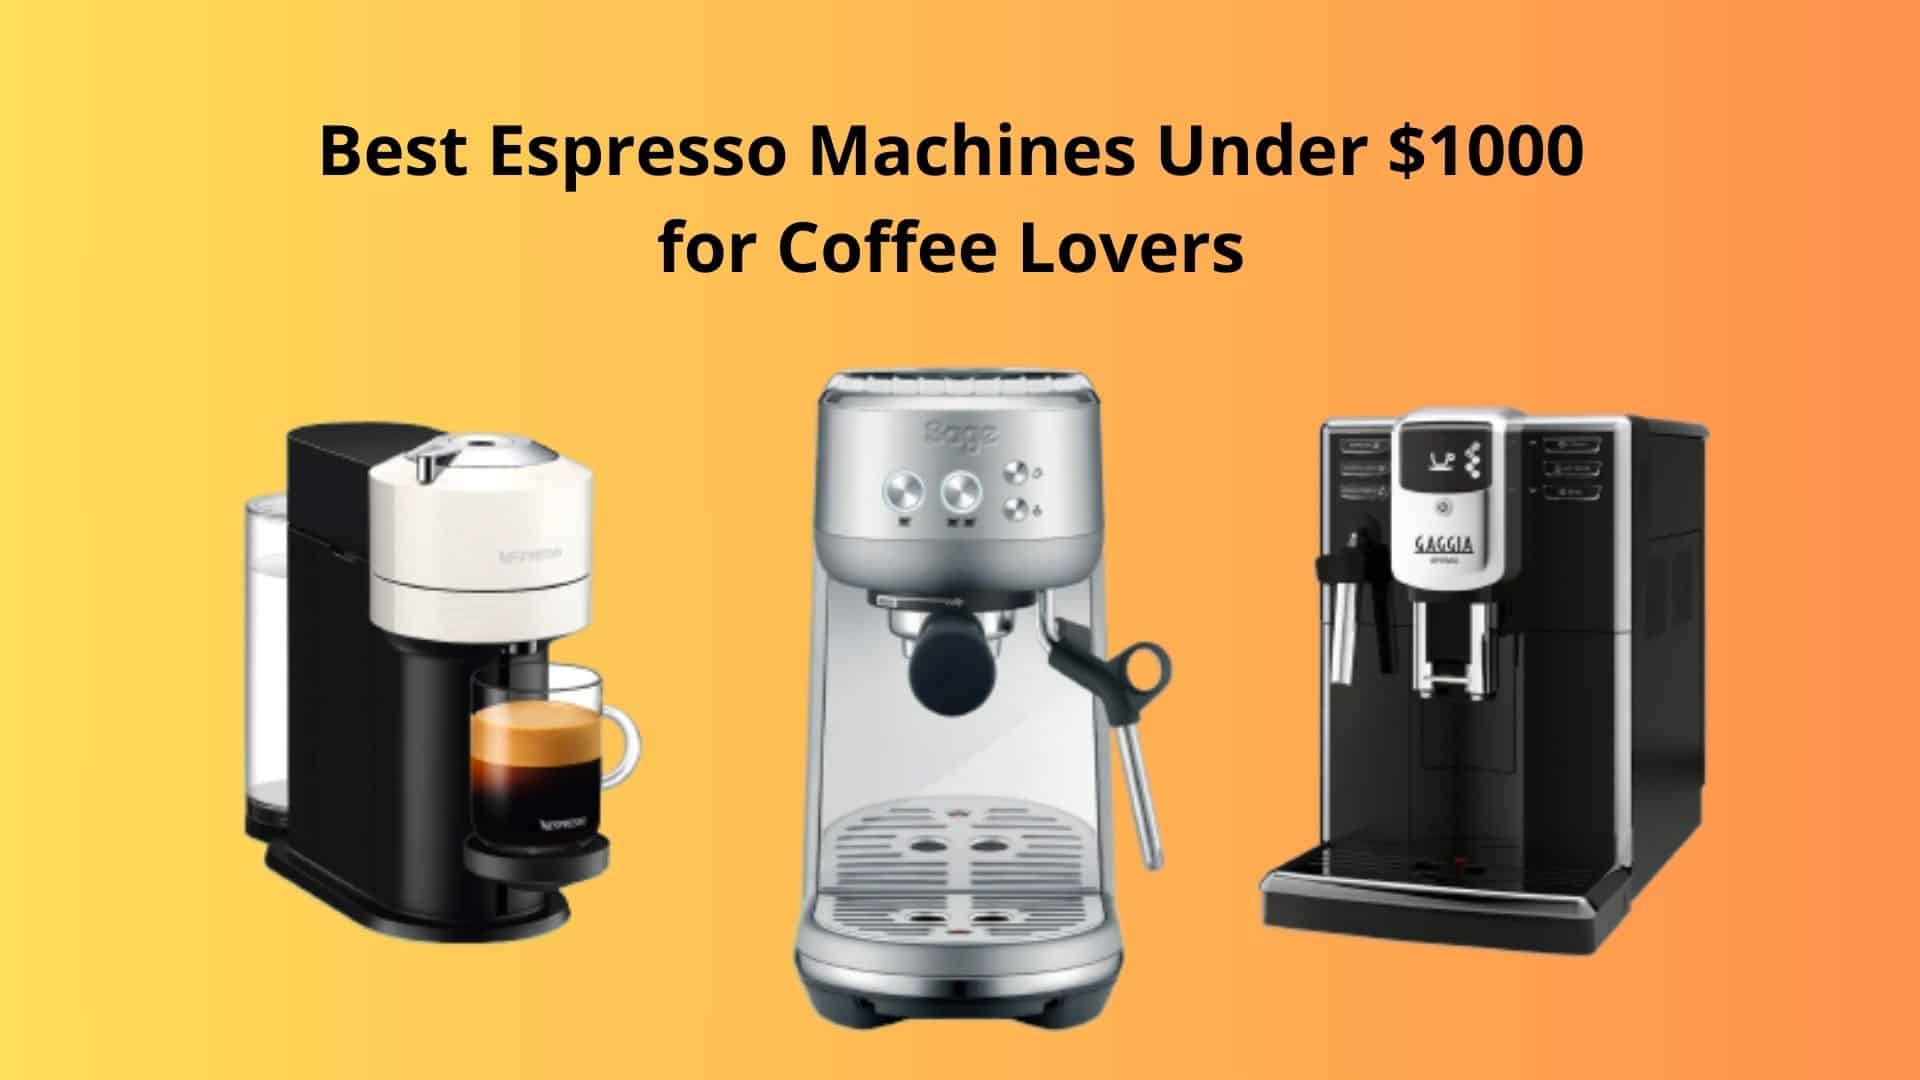 Best 5 espresso machines for coffee lovers